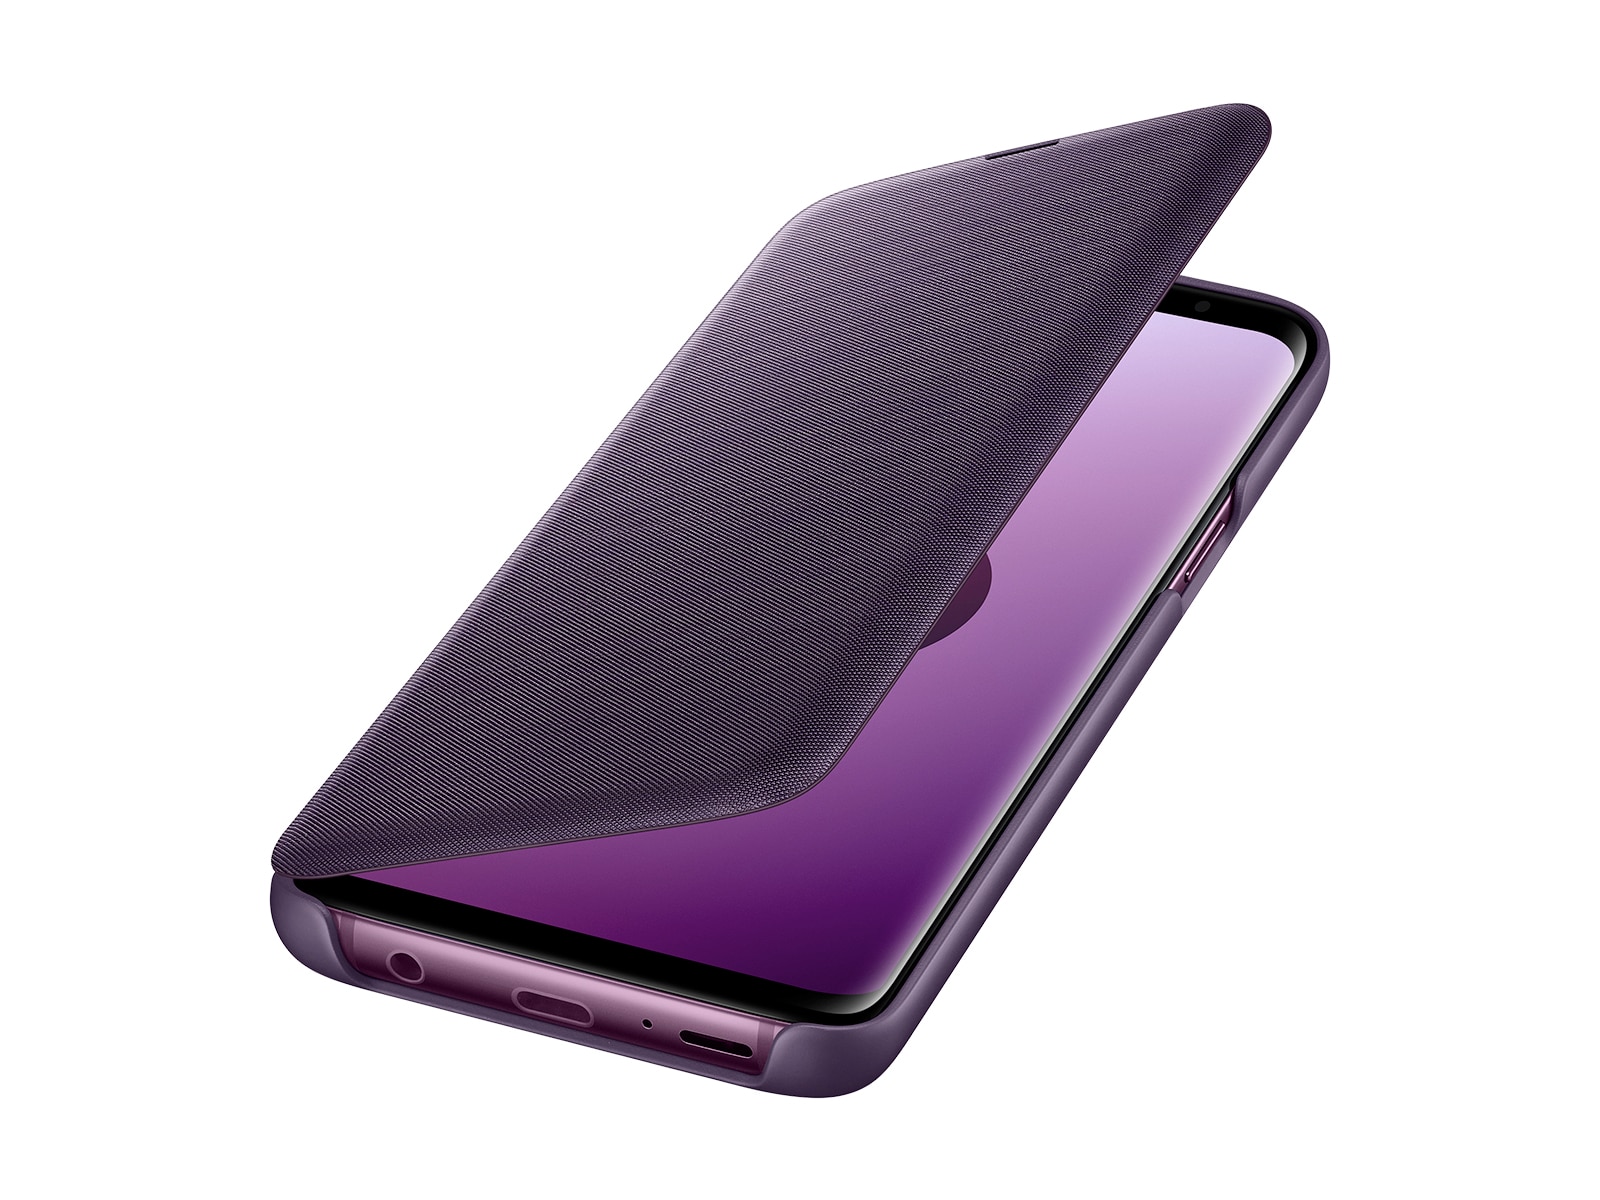 Galaxy S9 LED Wallet Cover, Violet Mobile Accessories EFNG960PVEGUS Samsung US